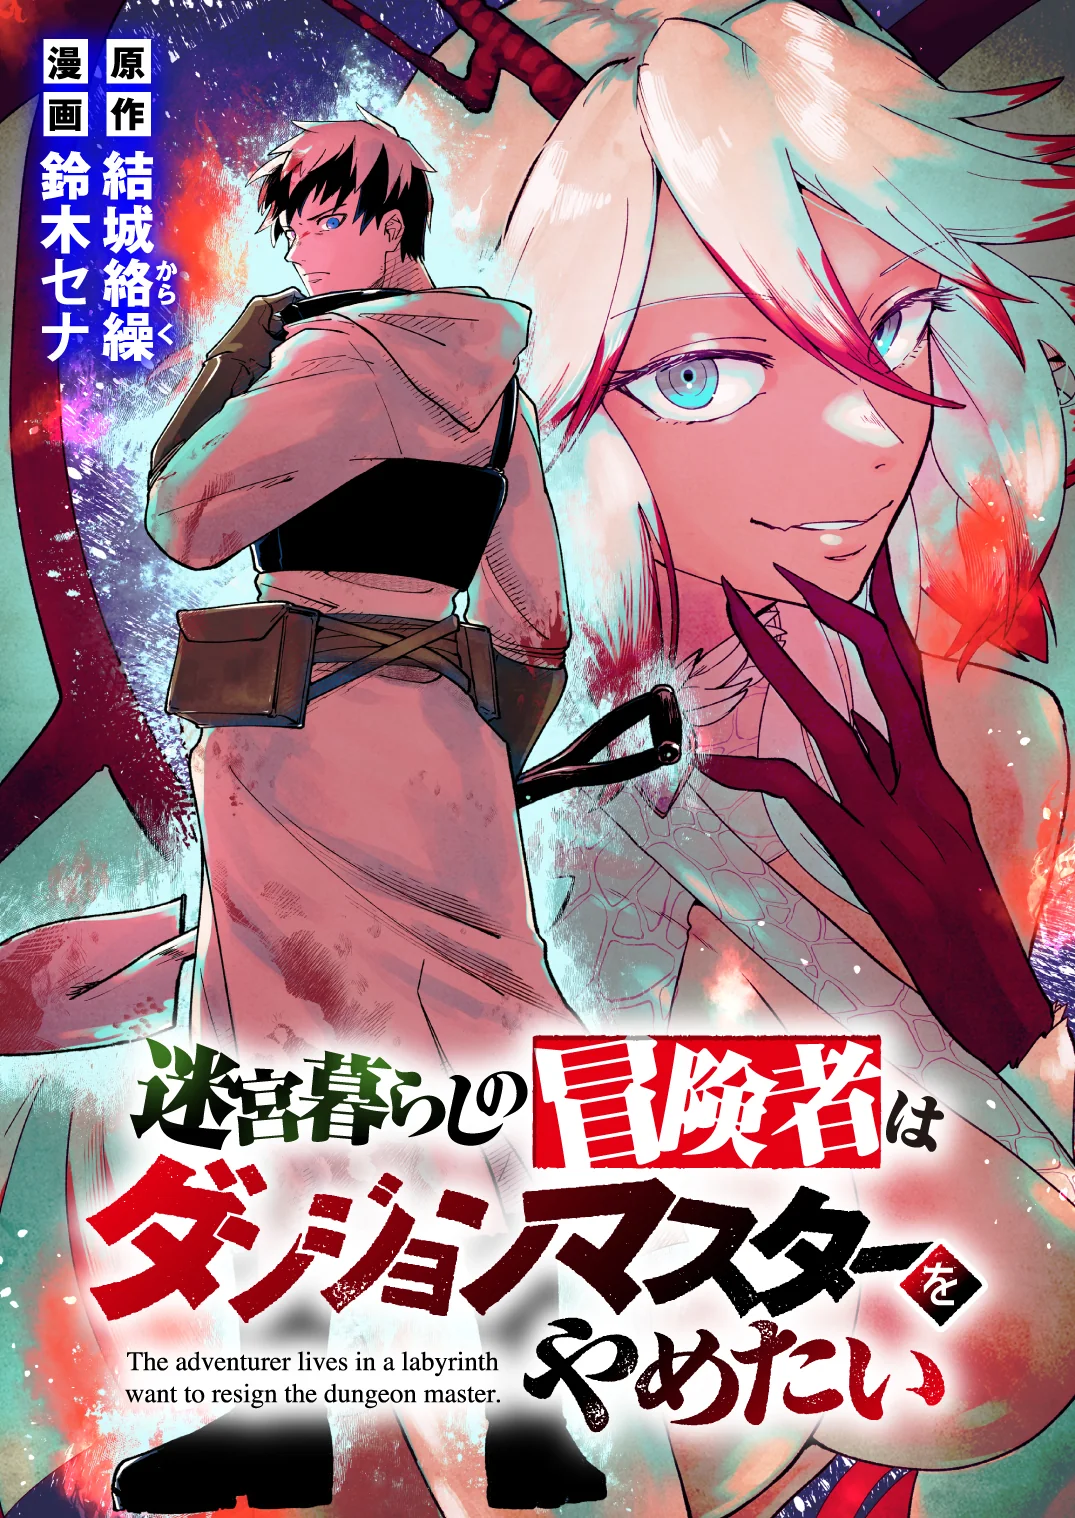 The Part-Time Land of the Gods Manga - Read the Latest Issues high